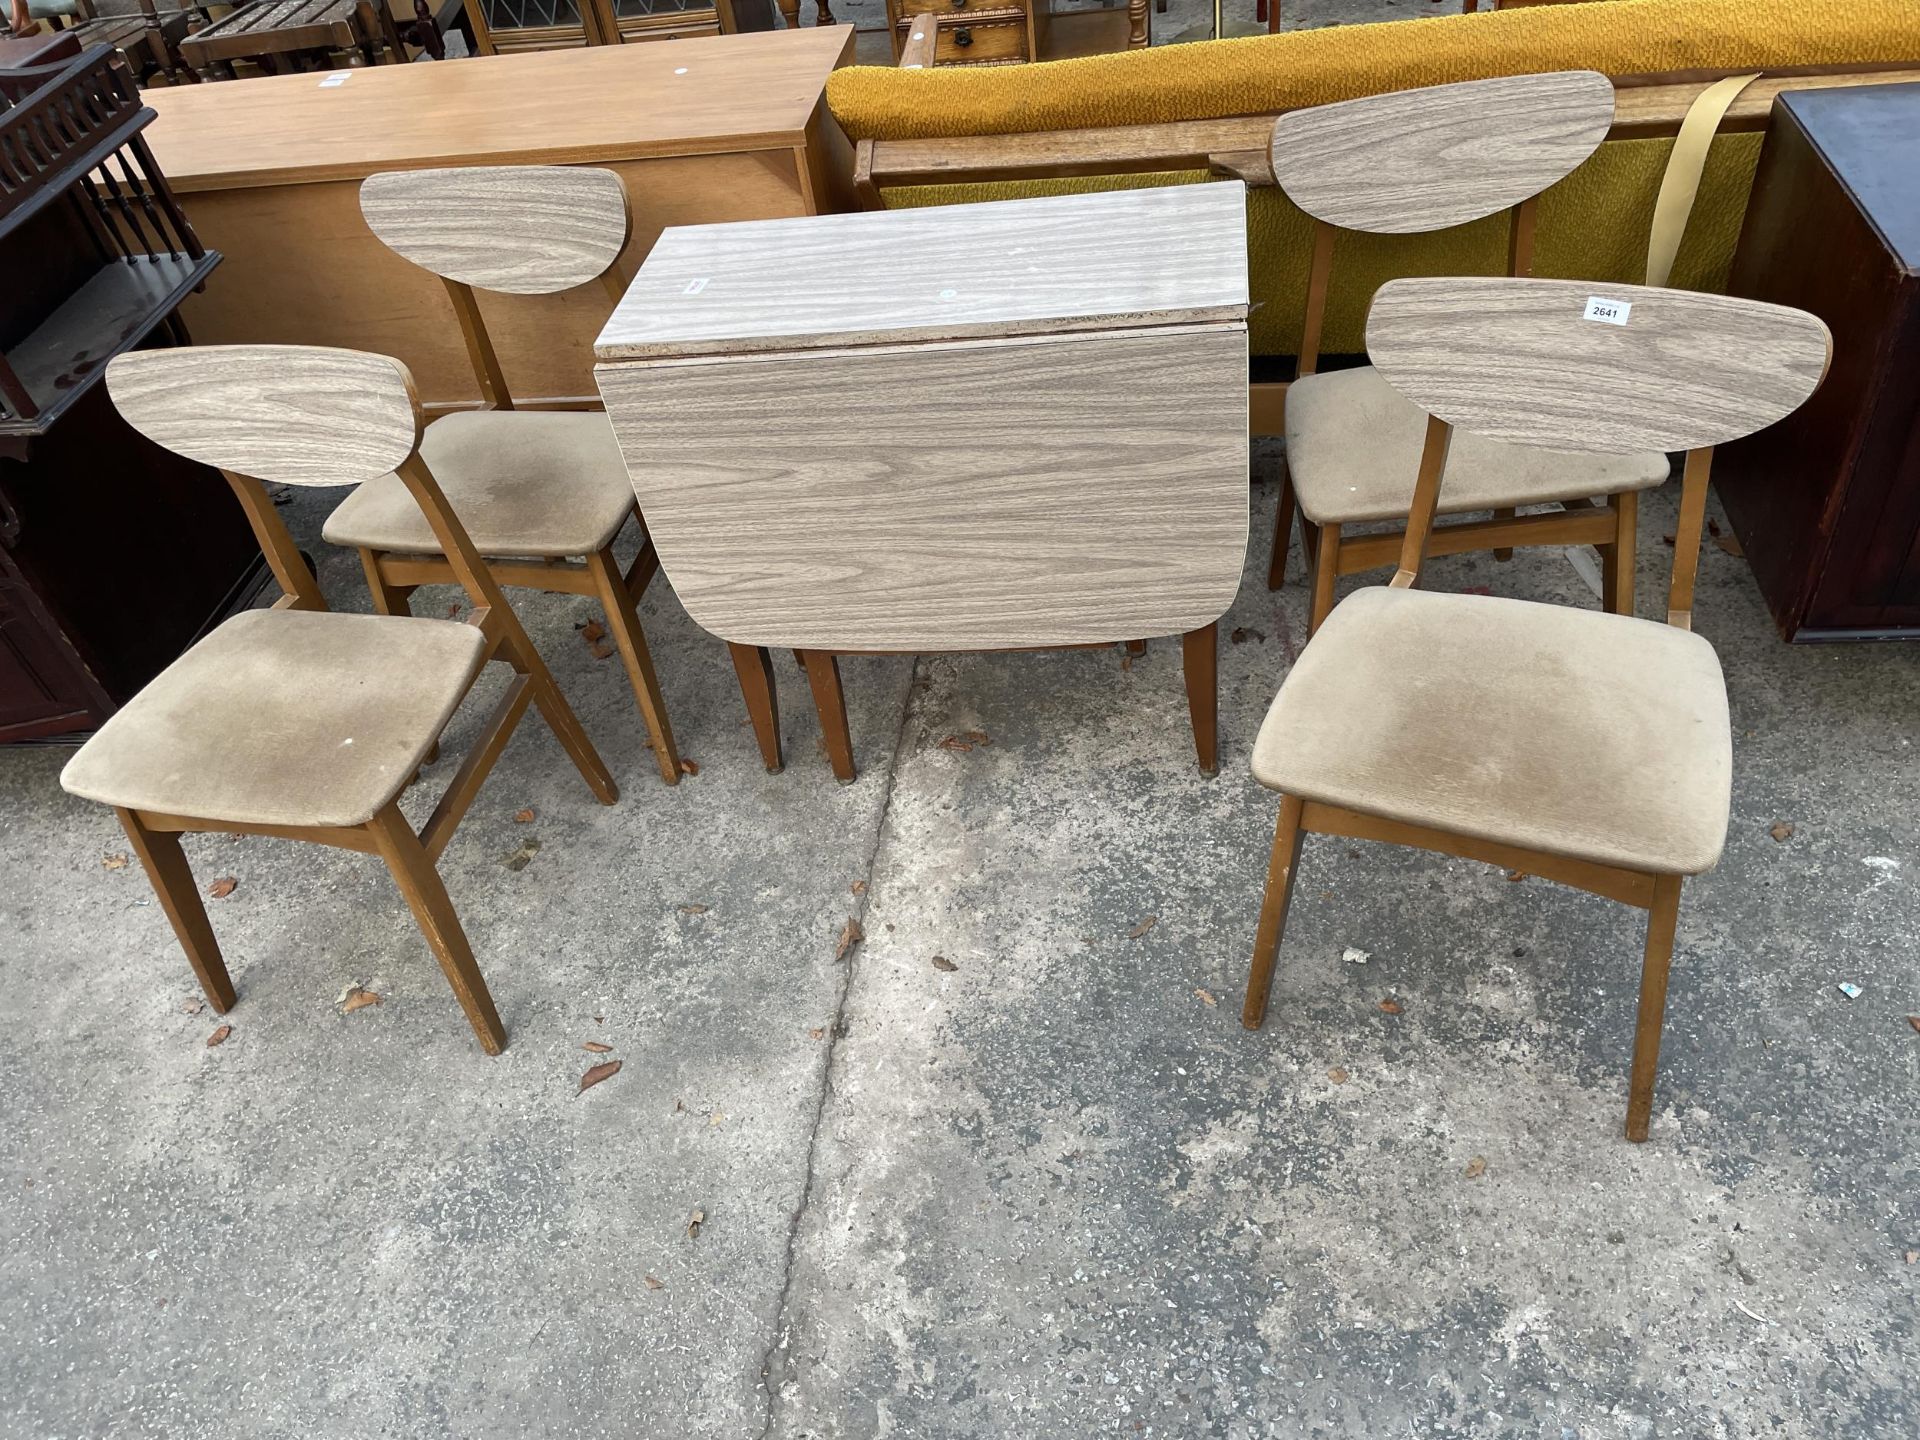 A RETRO FORMICA TOP DROP-LEAF KITCHEN TABLE AND FOUR MATCHING CHAIRS